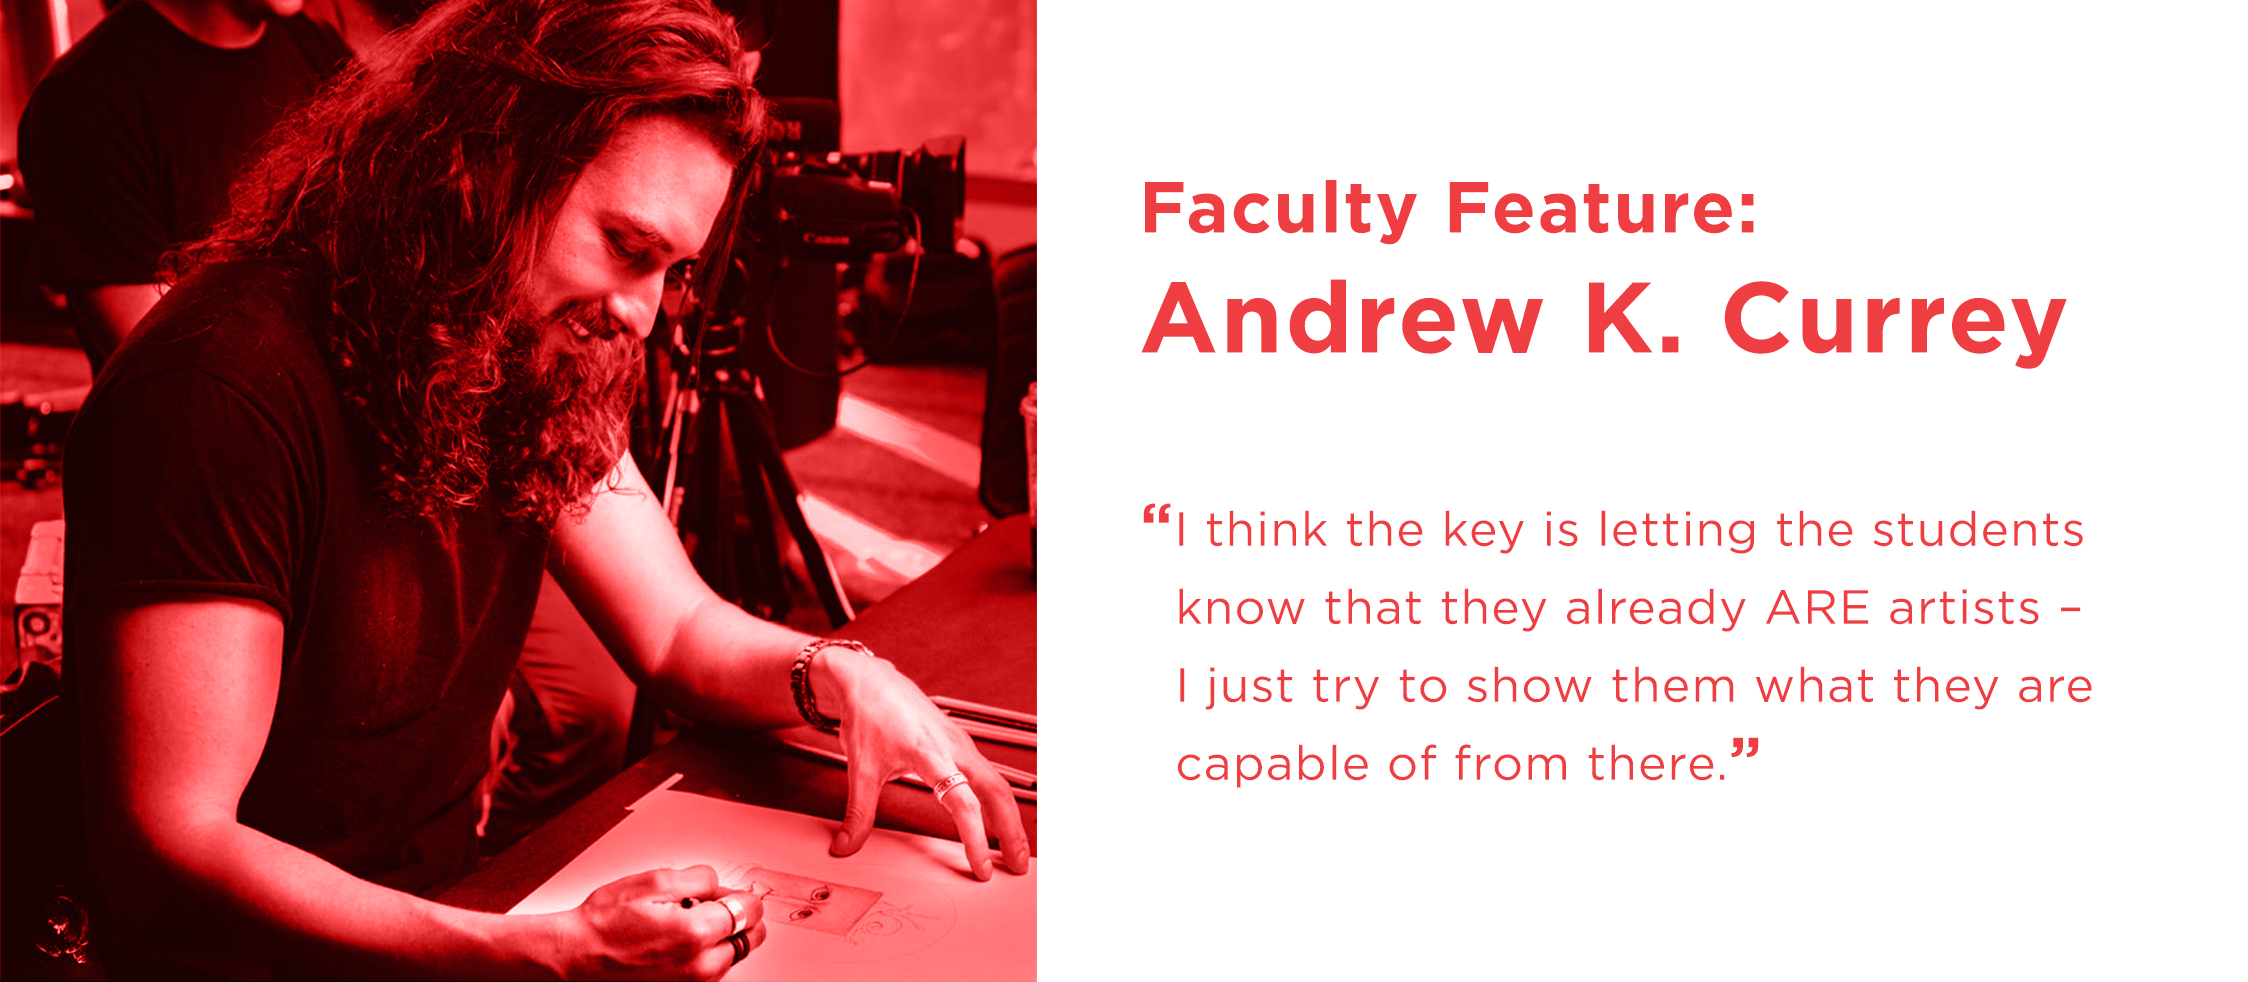 Faculty Feature: Andrew K. Currey